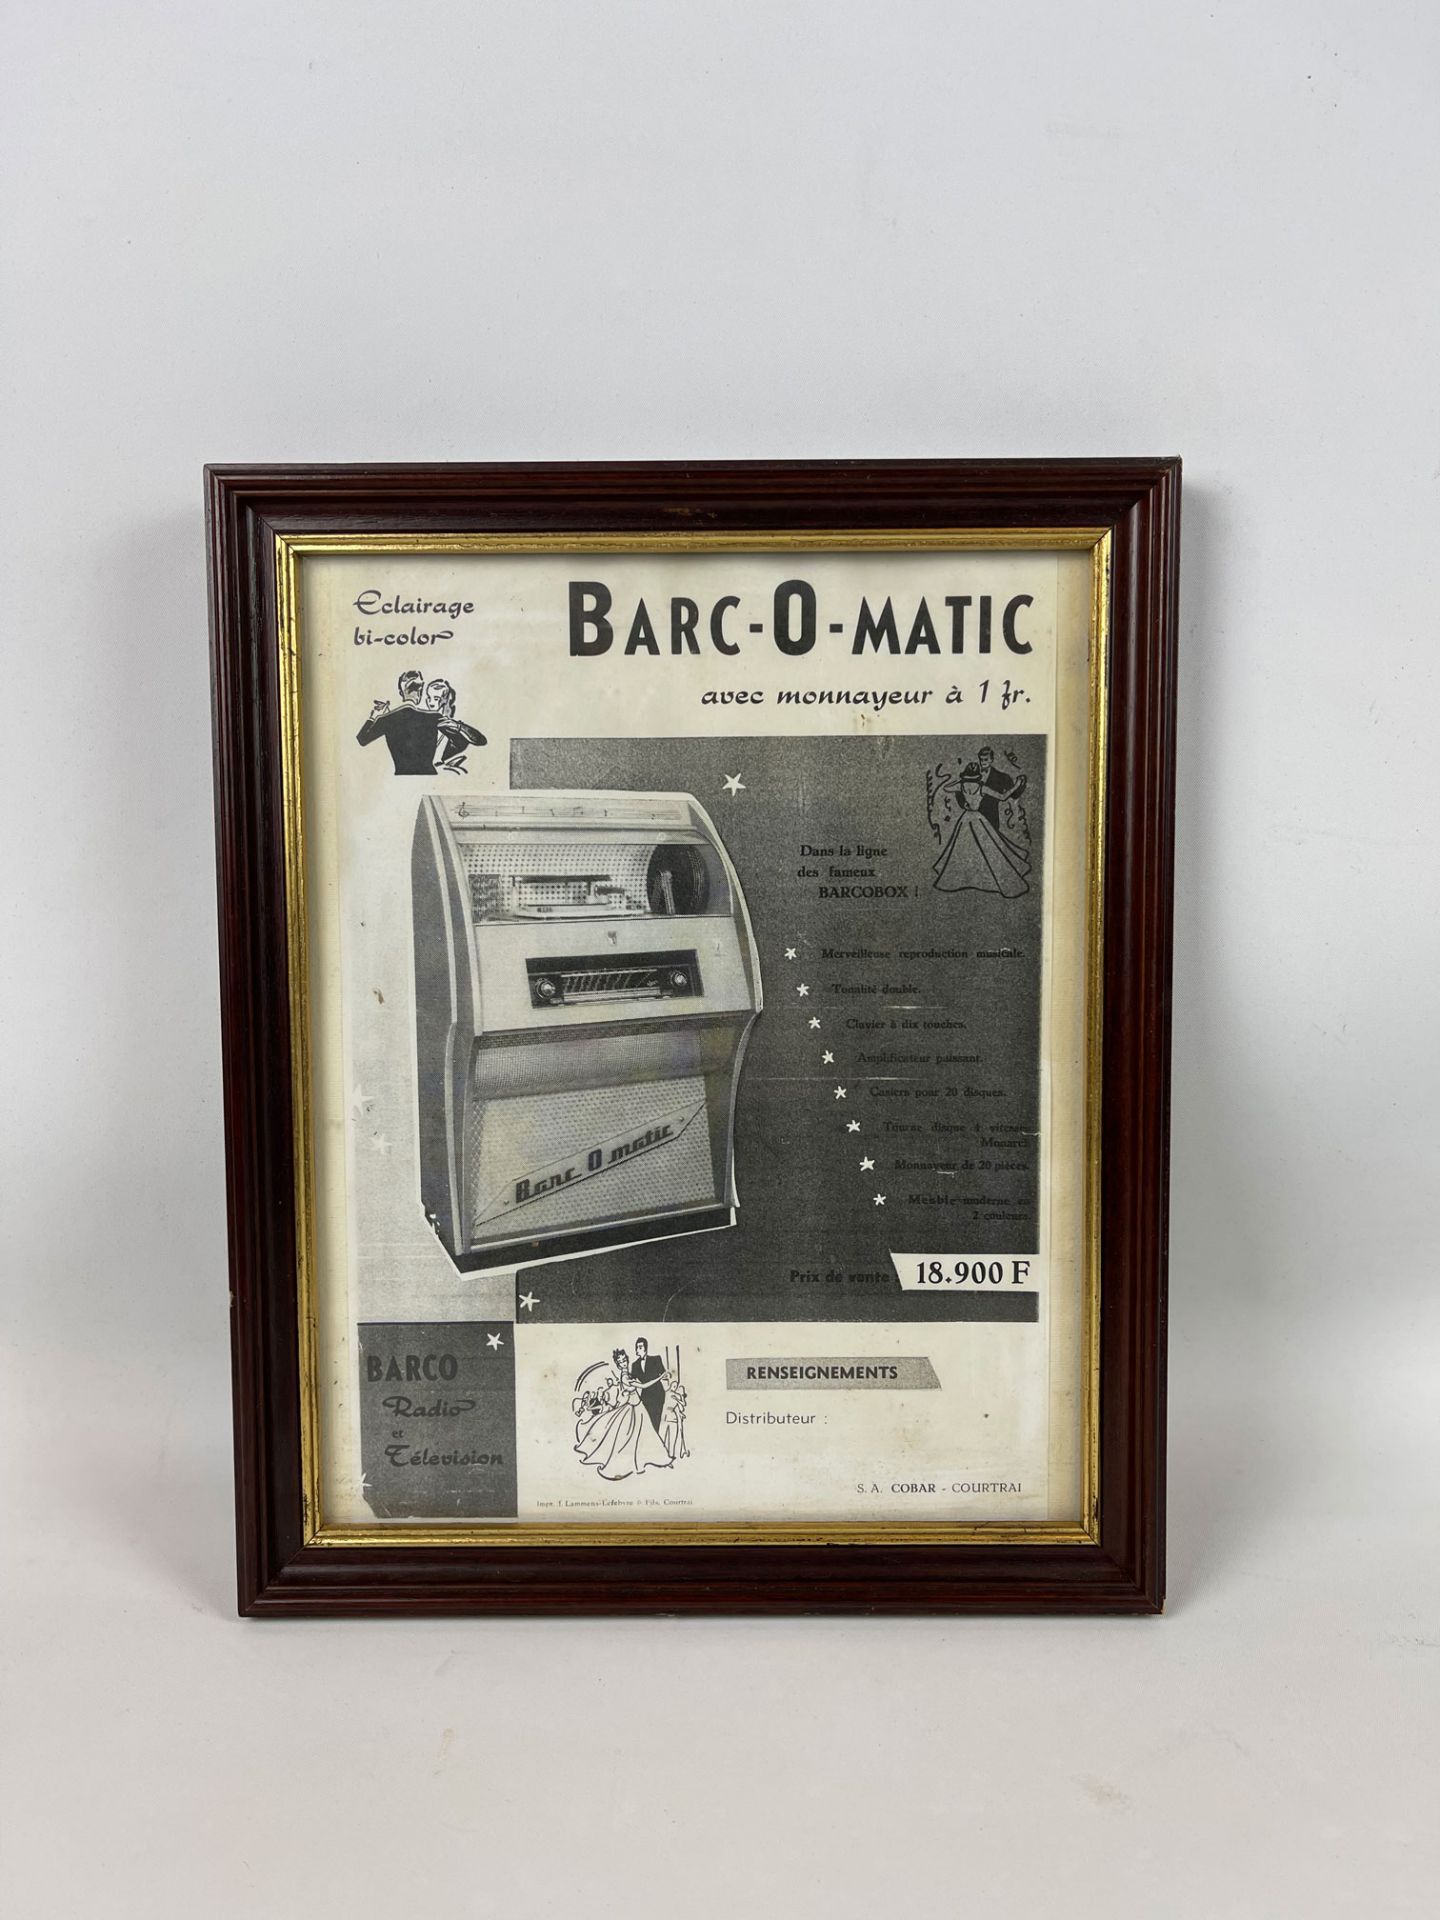 Framed Belgian Barco Barc-O-Matic Coin-Op Radio & Record Player Advertisement - Image 2 of 3